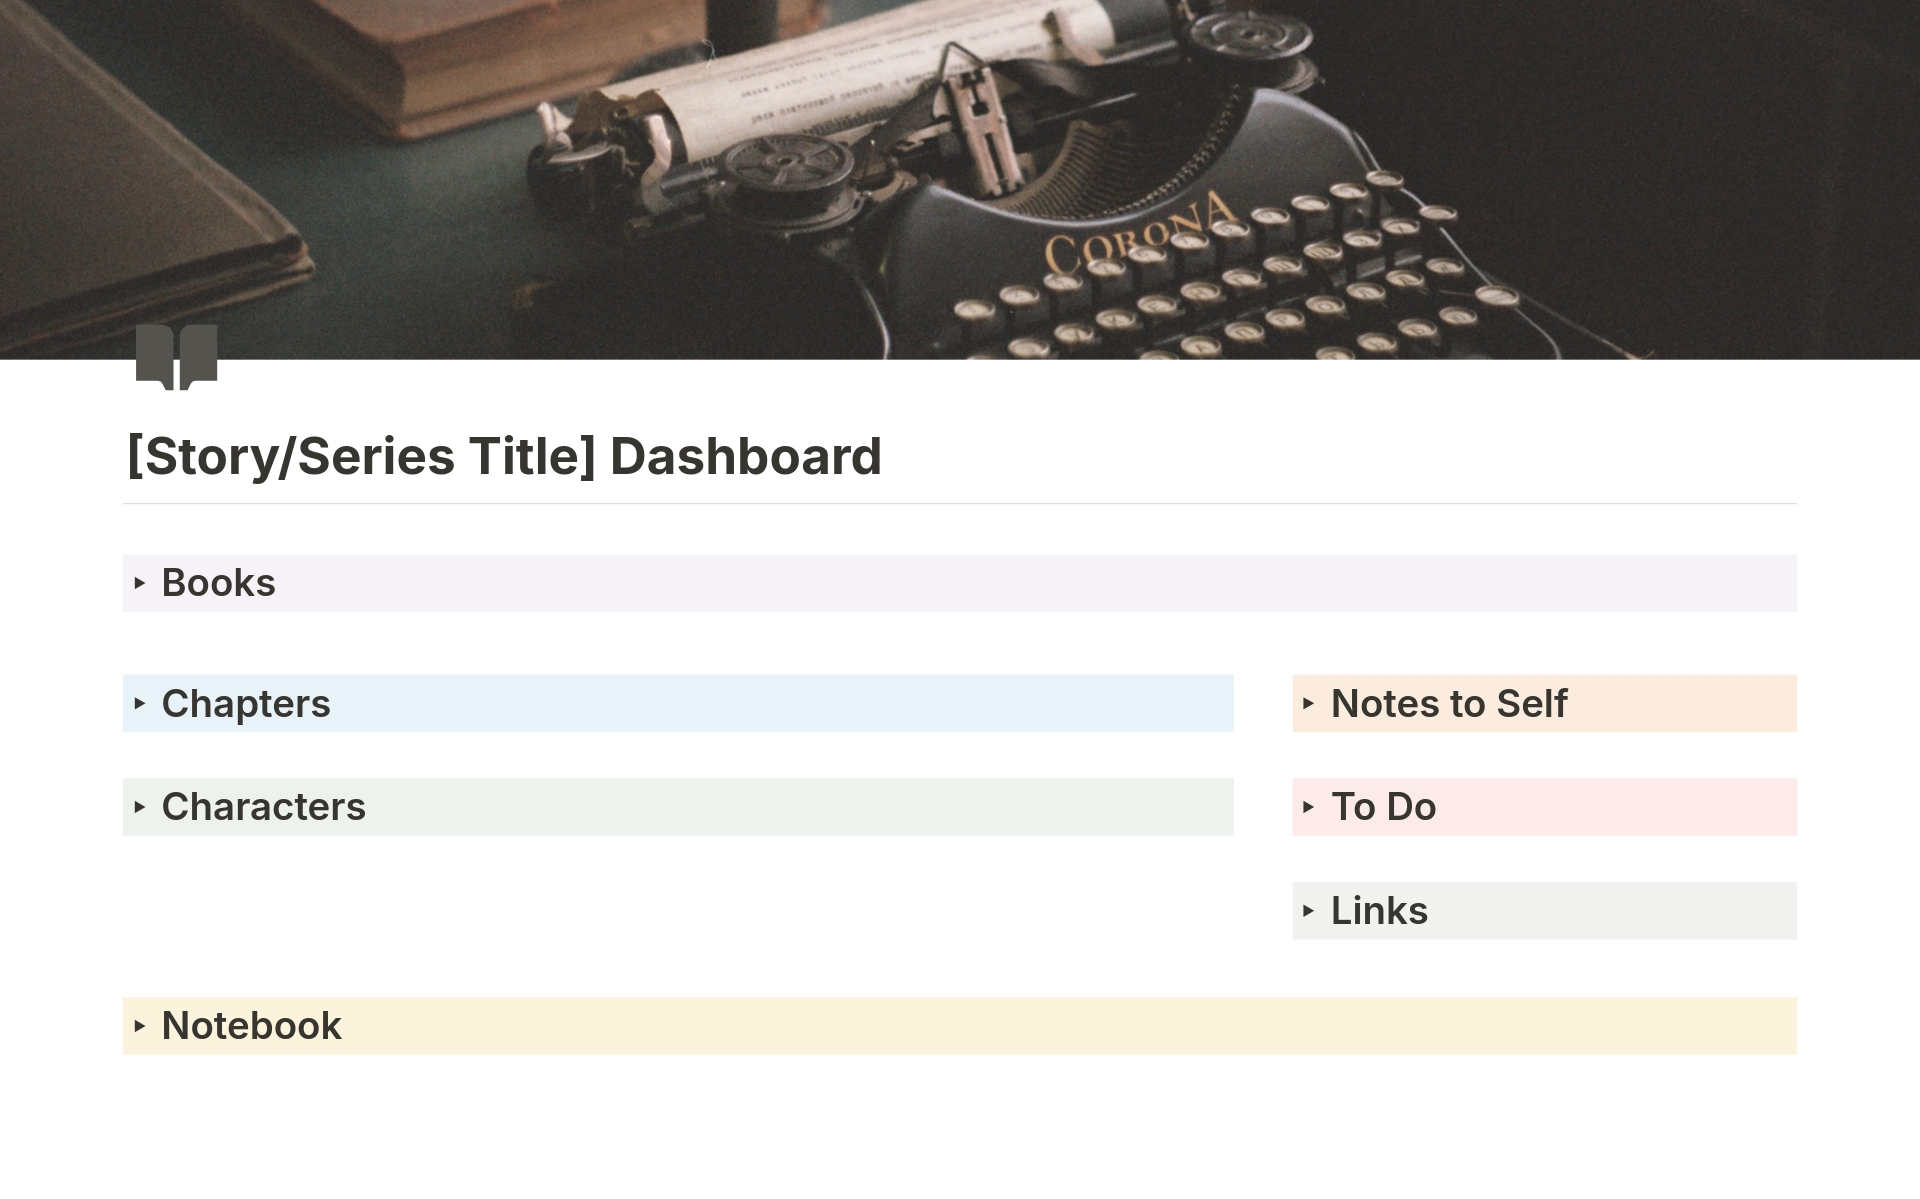 A one stop bare bones fiction writing dashboard. Suitable for a novel or series as well as anthology and collections of shorter works.